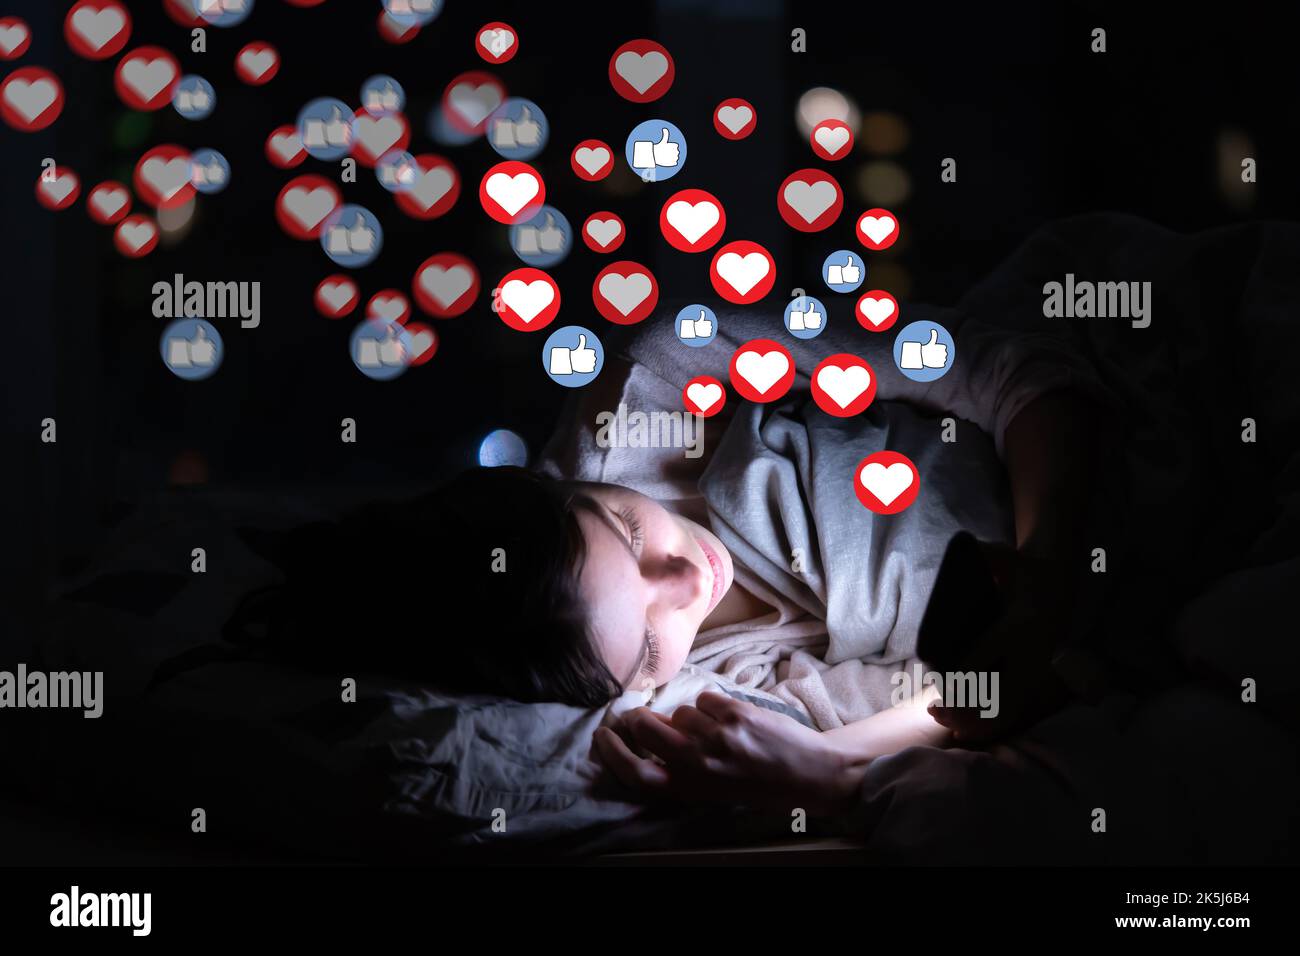 Girl with phone at night, receives hearts and likes. Stock Photo